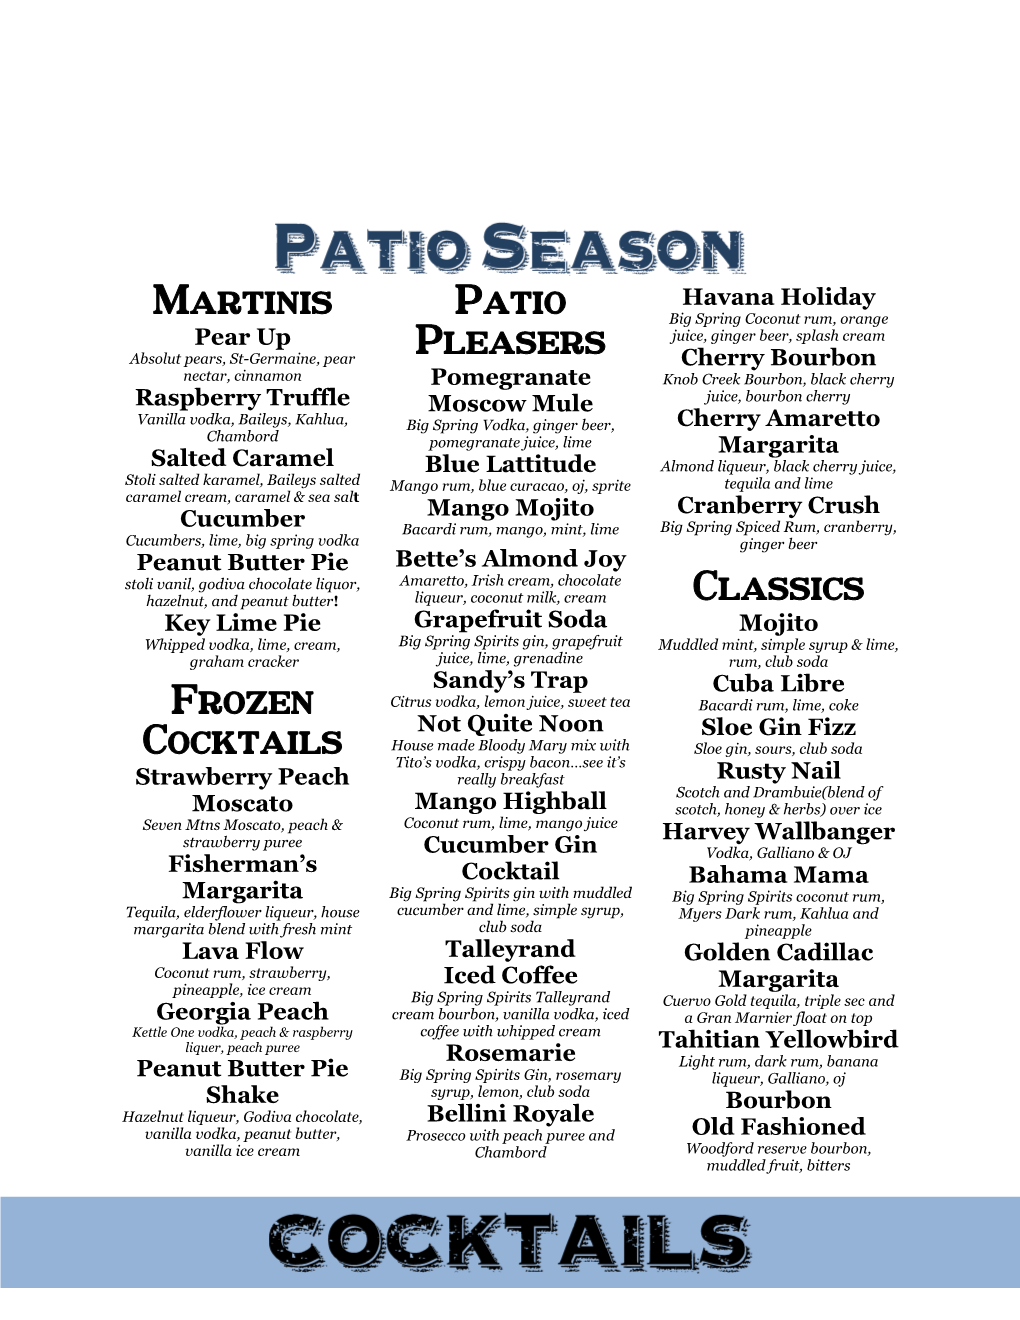 Martinis Frozen Cocktails Patio Pleasers Classics